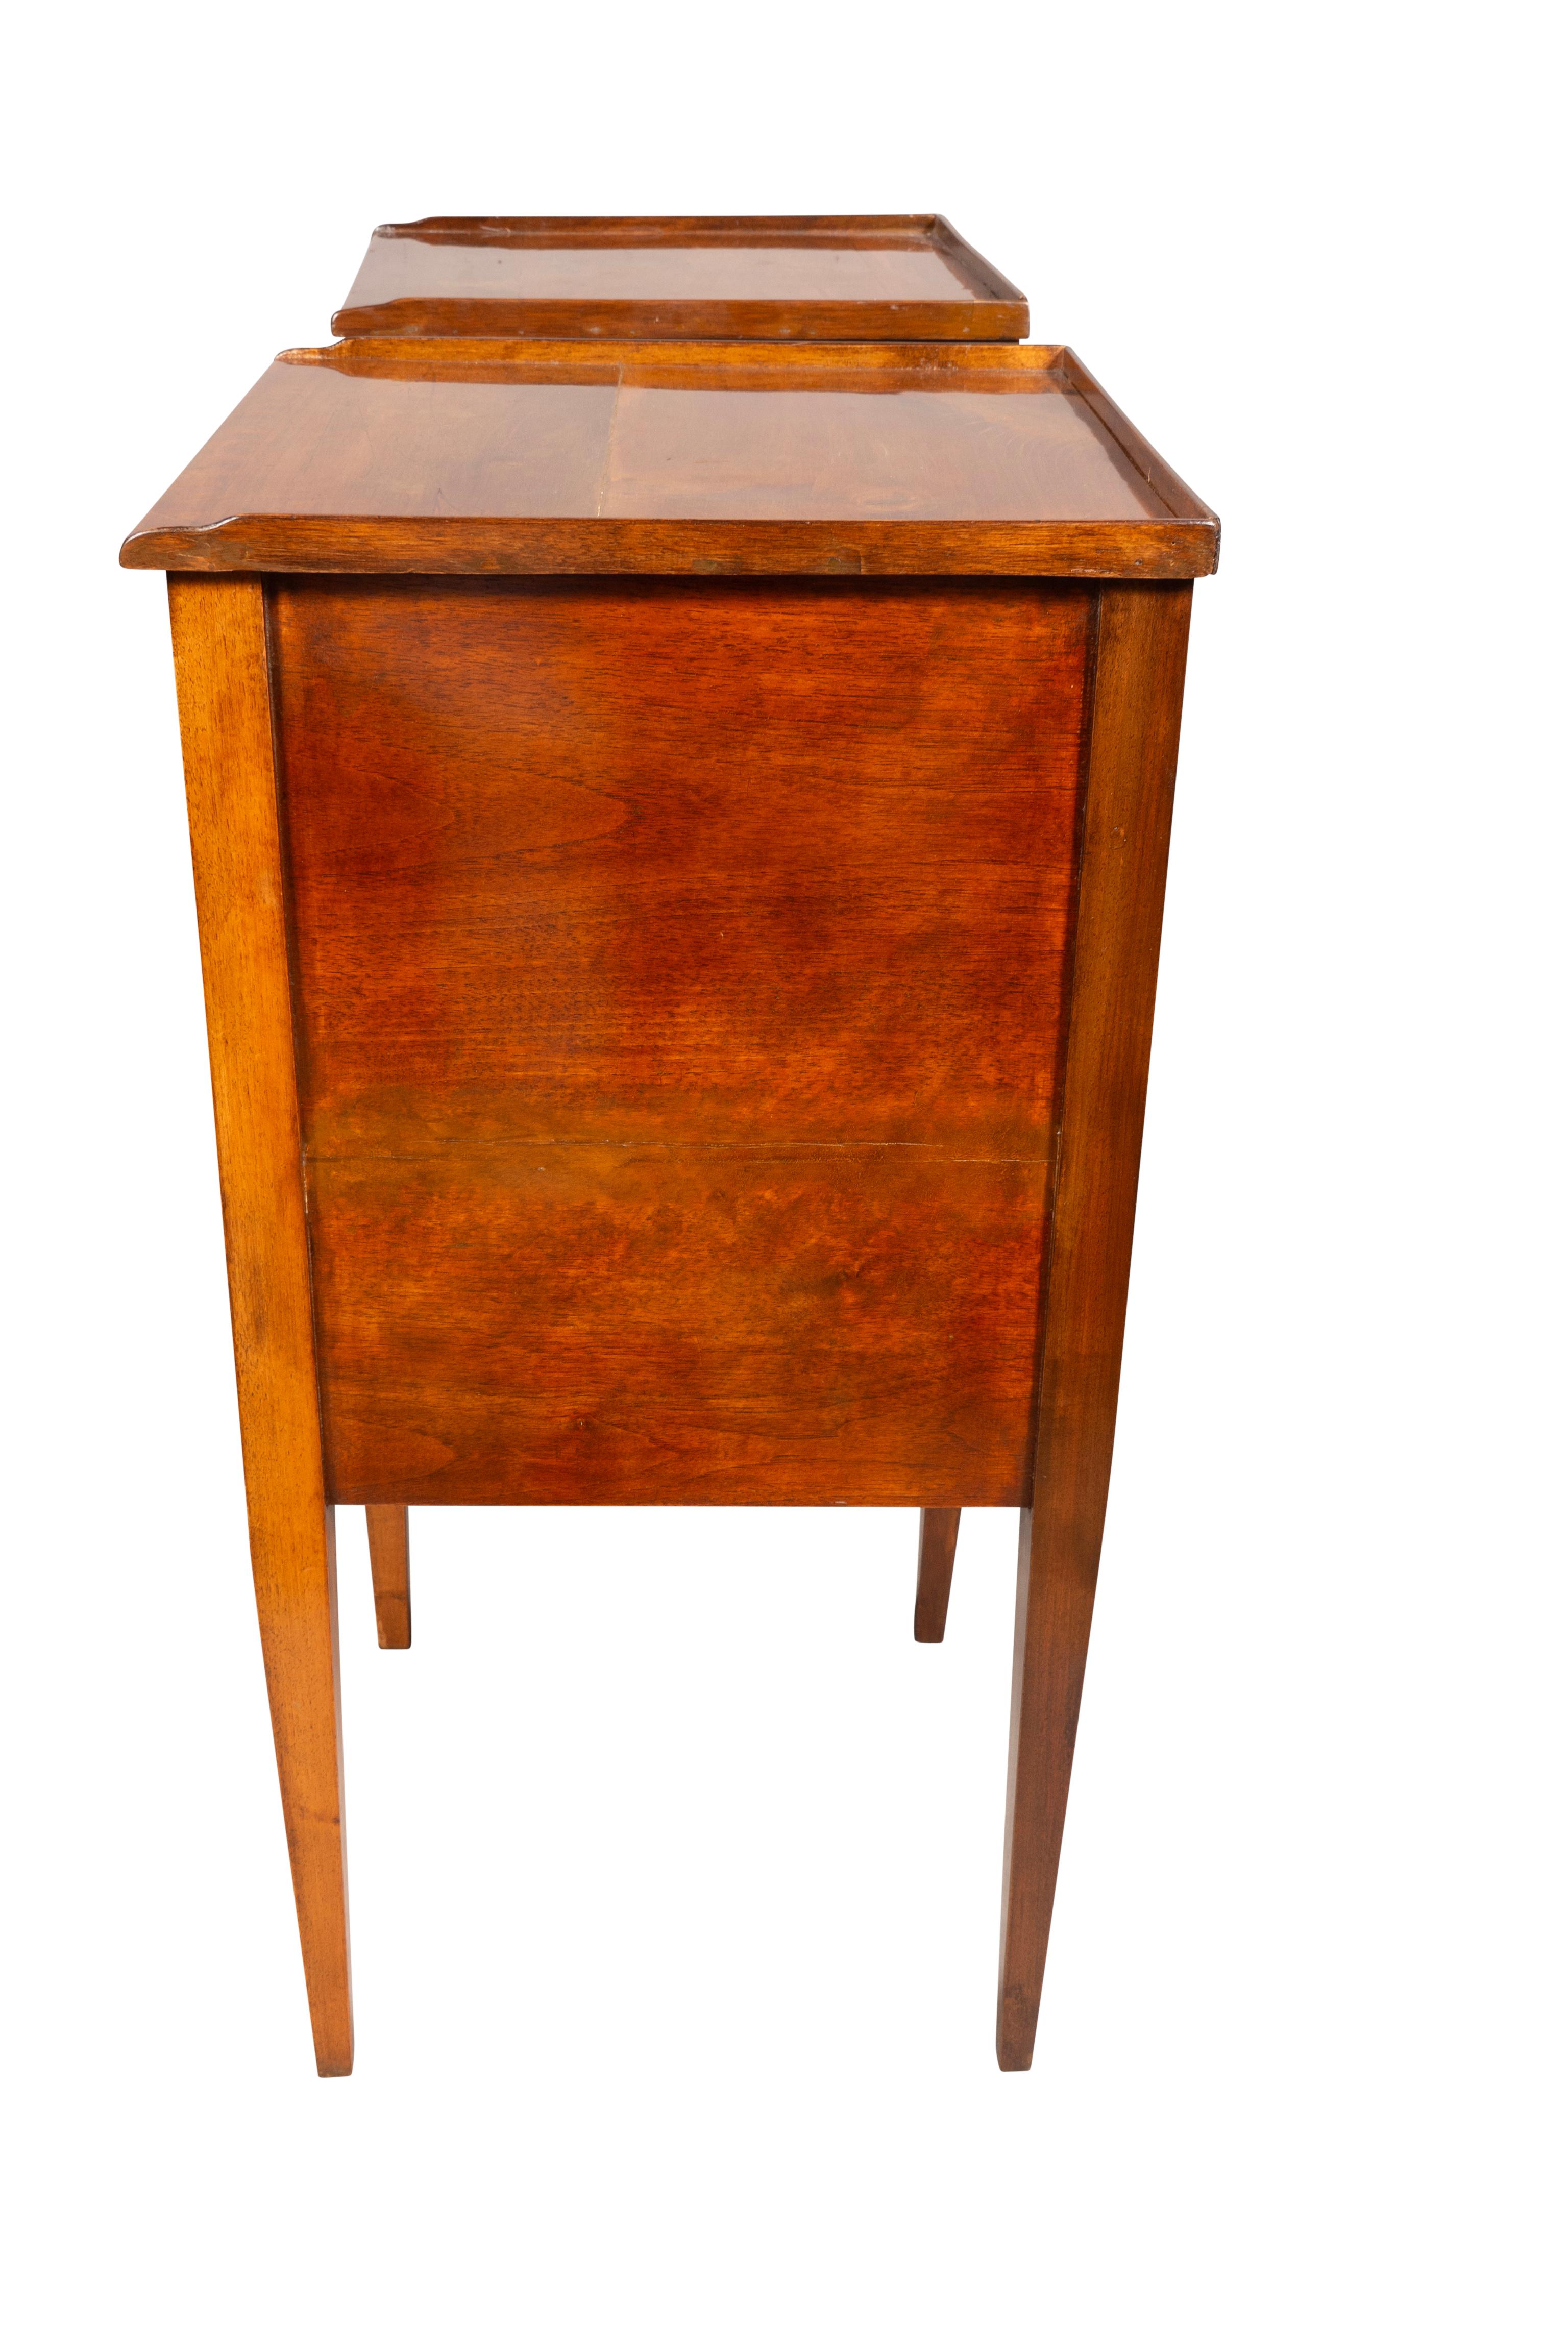 19th Century Pair Of Italian Neoclassic Style Walnut Side Tables For Sale